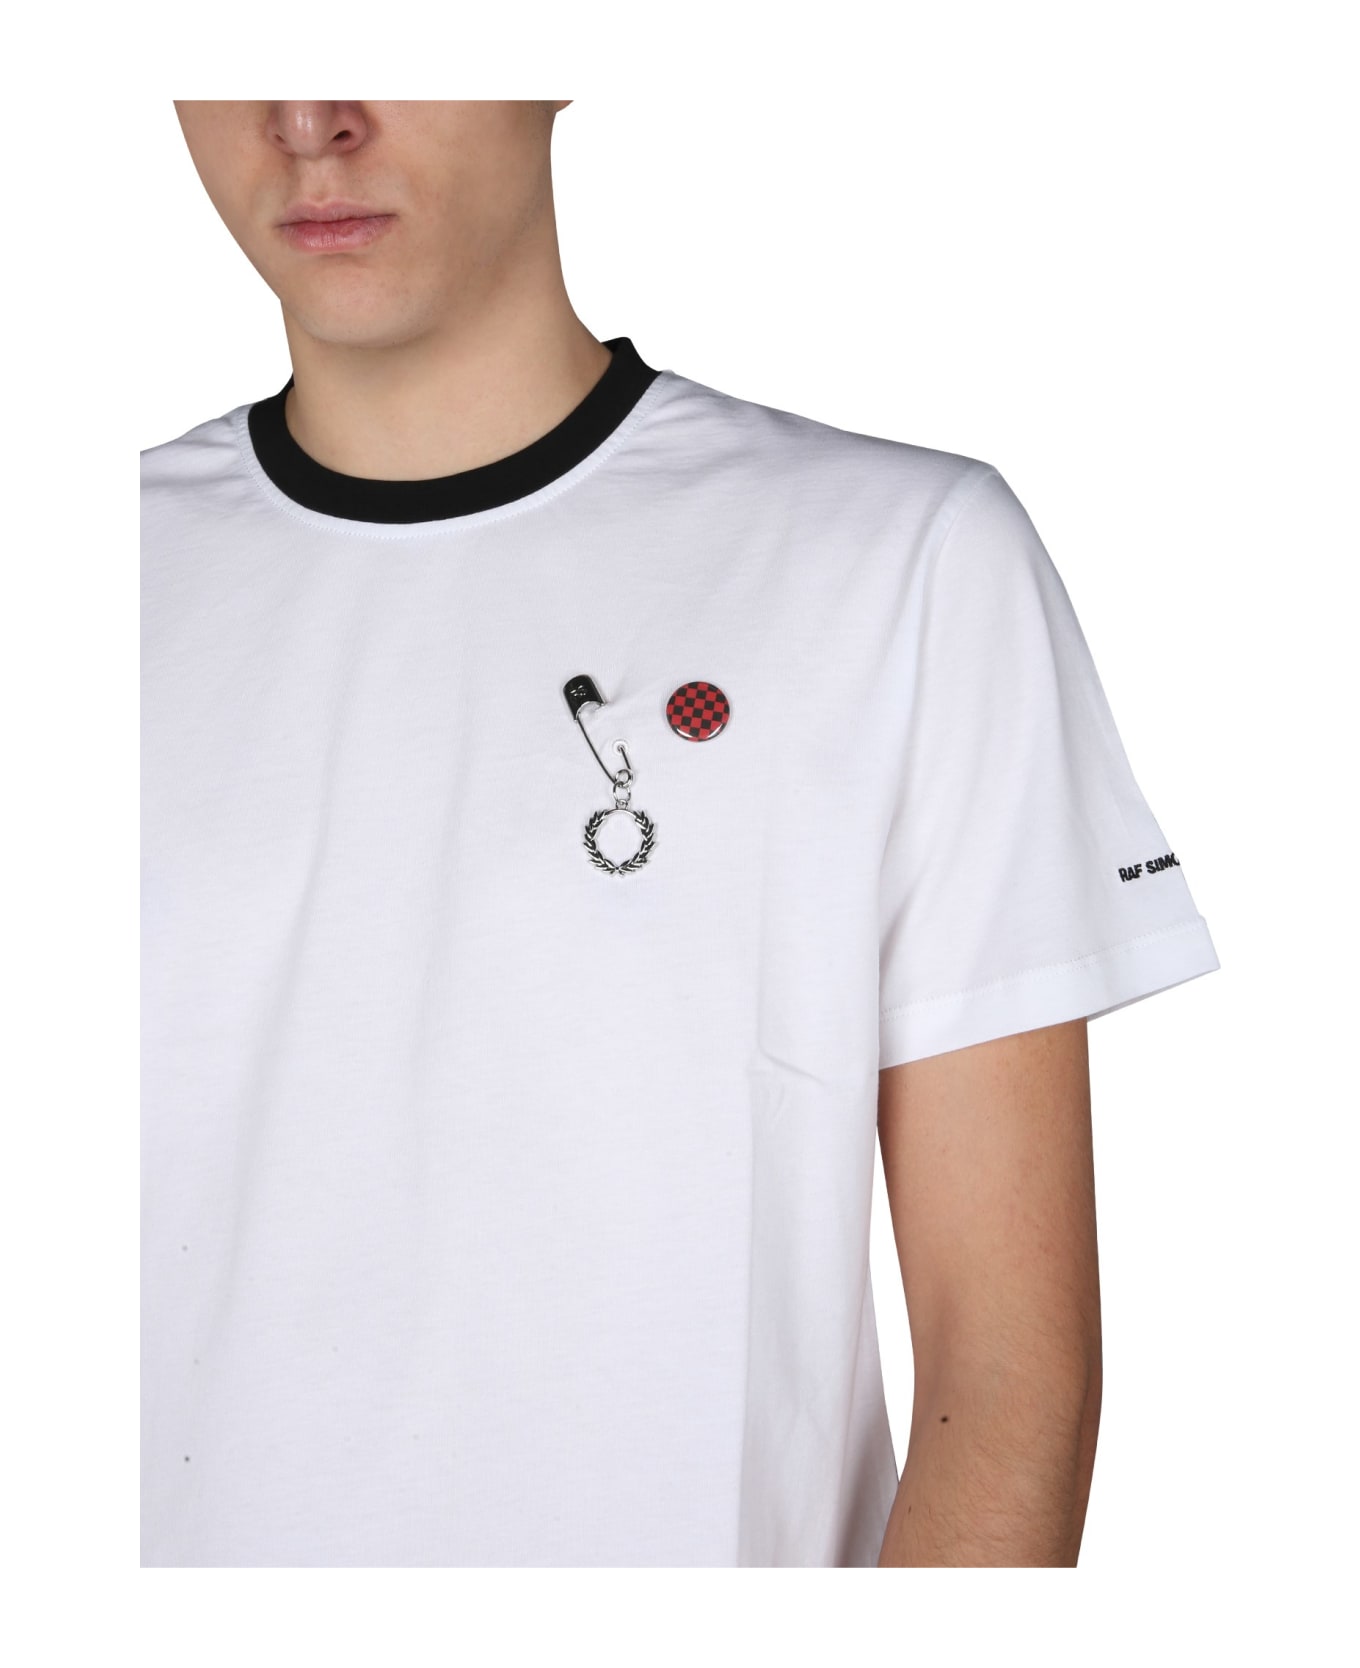 Fred Perry by Raf Simons Slim Fit T-shirt - BIANCO